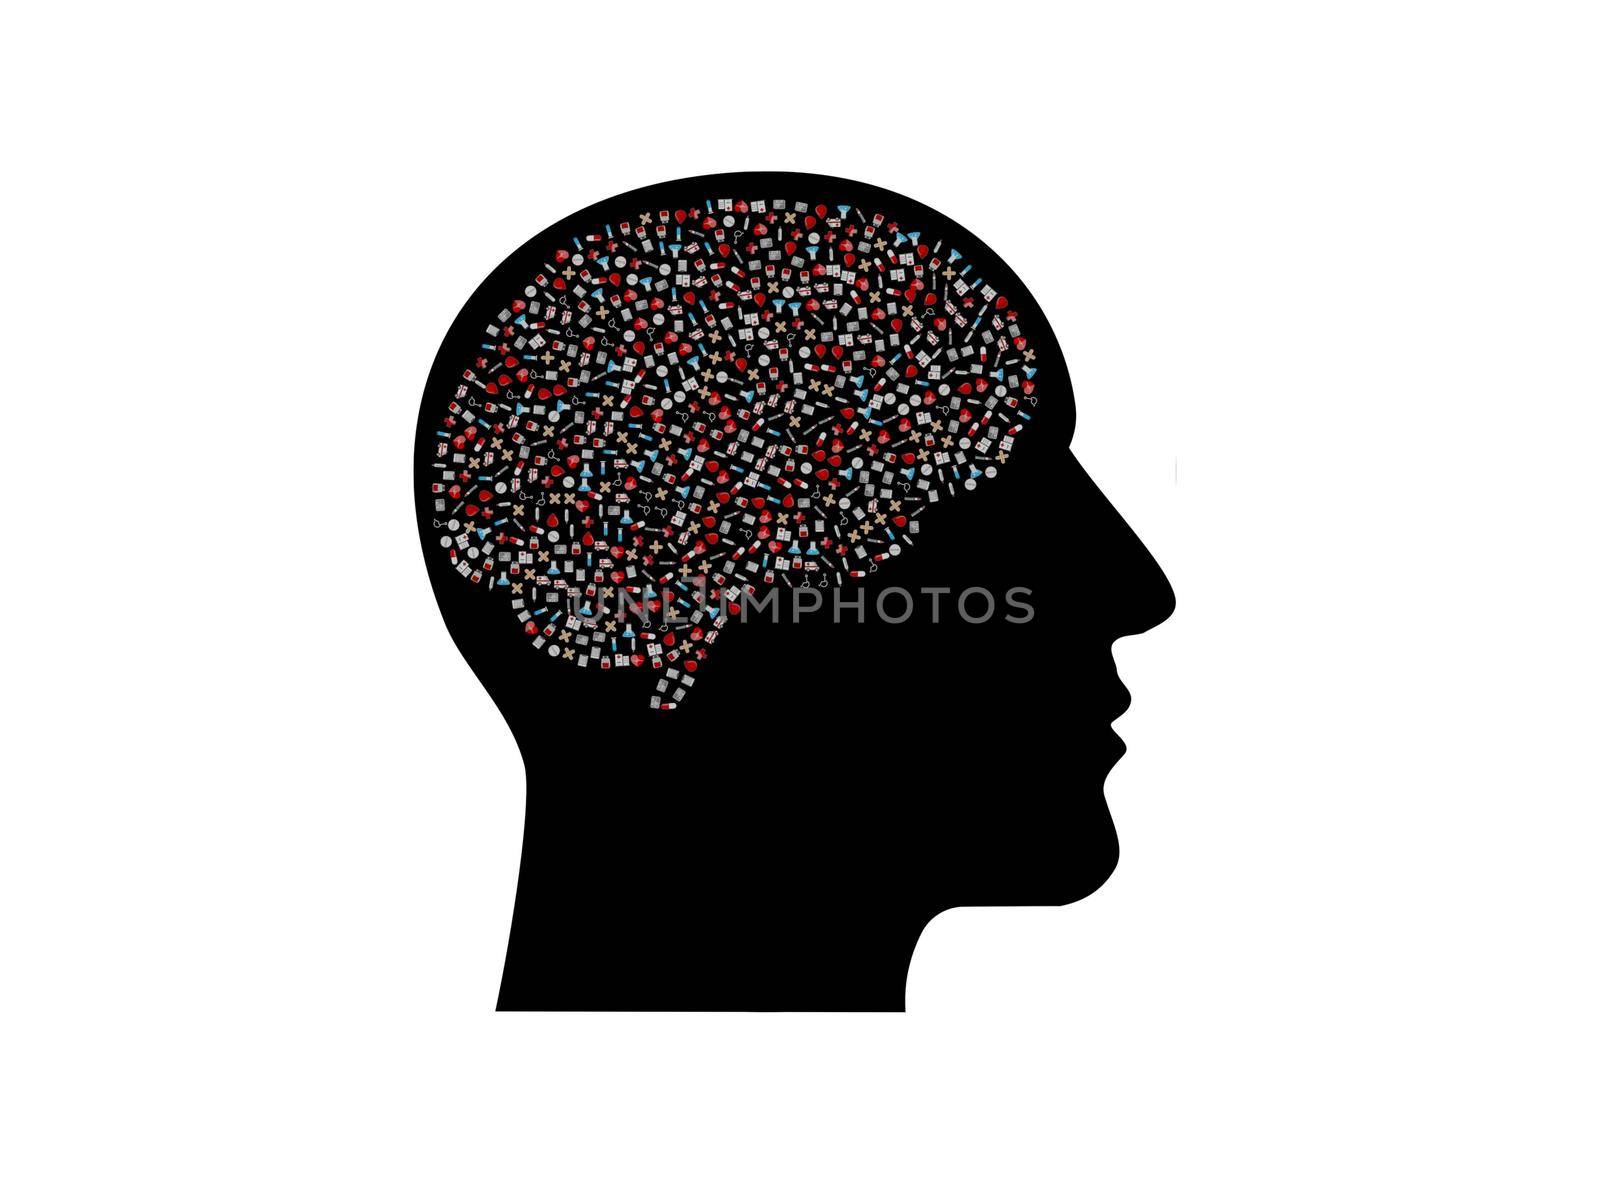 several questions about the brain on white background - 3d rendering by mariephotos